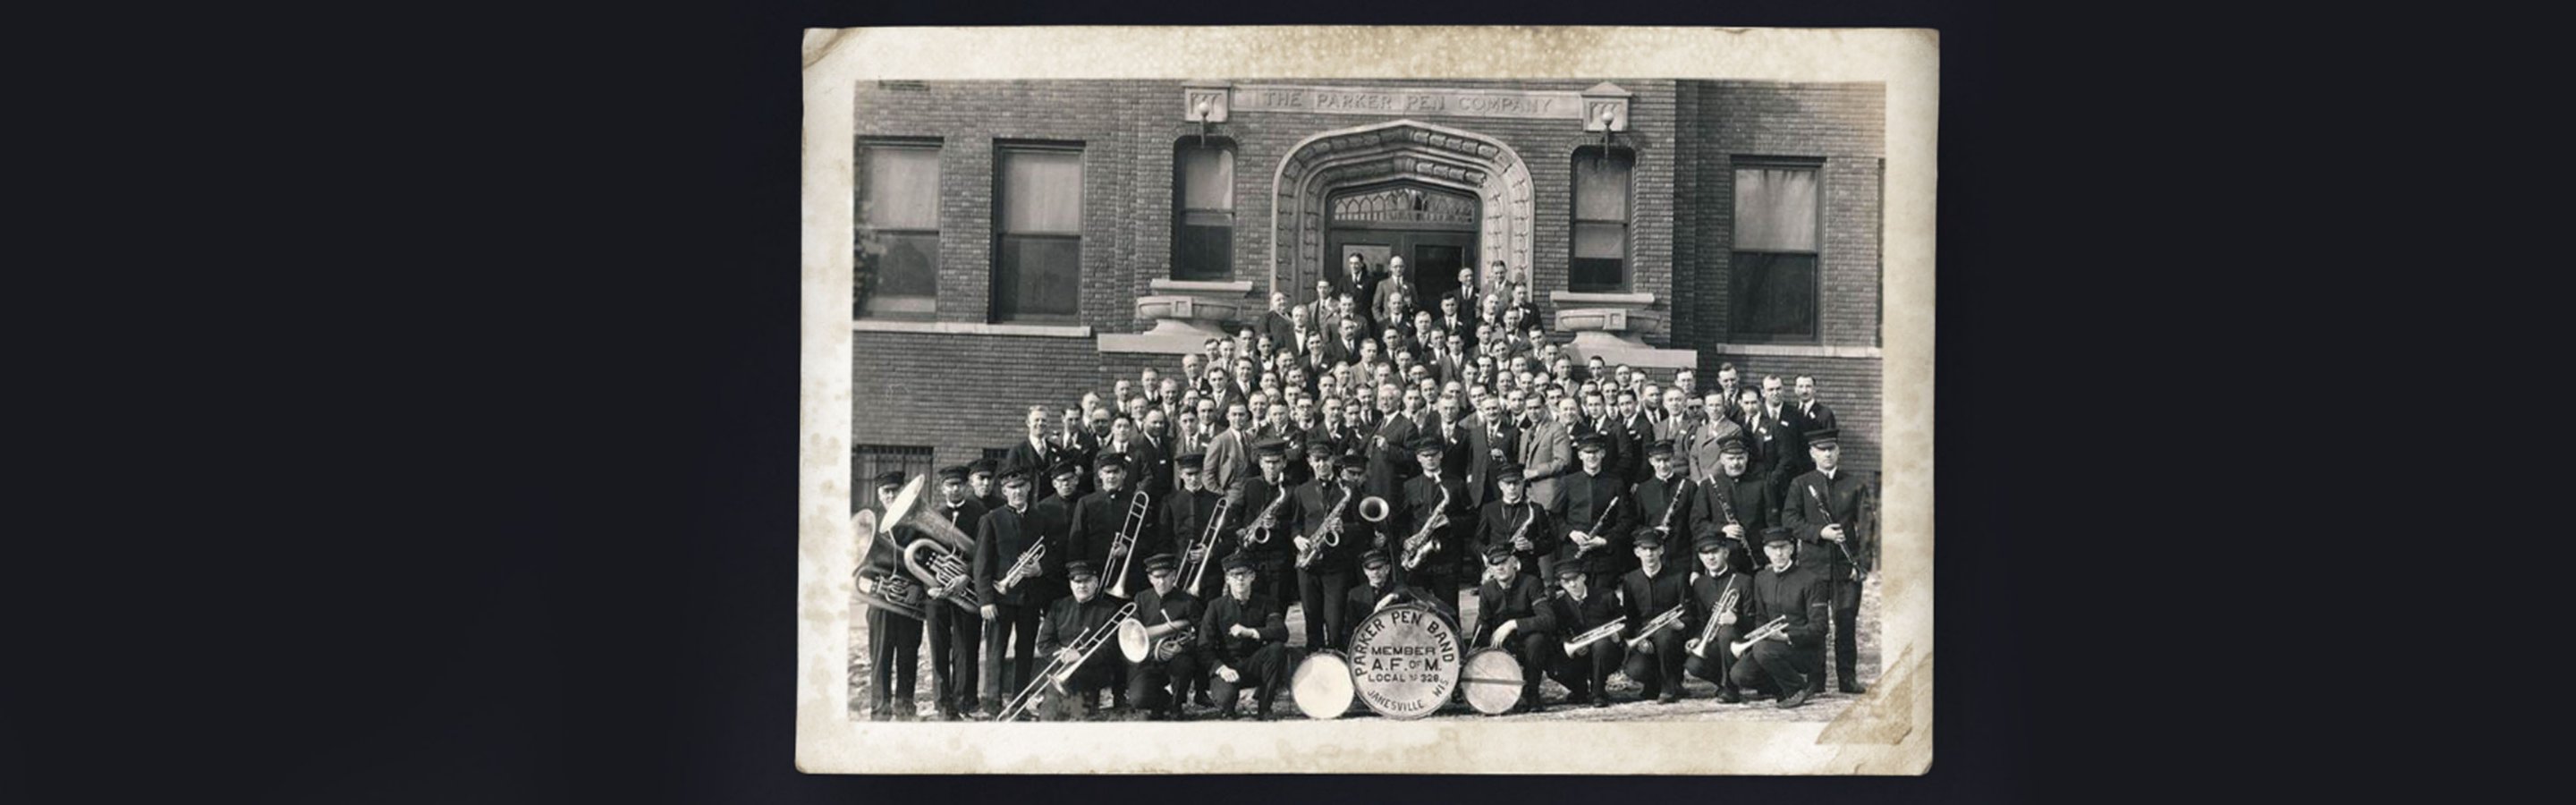 A vintage photograph of the Parker Pen marching band and men in suits in from of the Parker Pen factory.